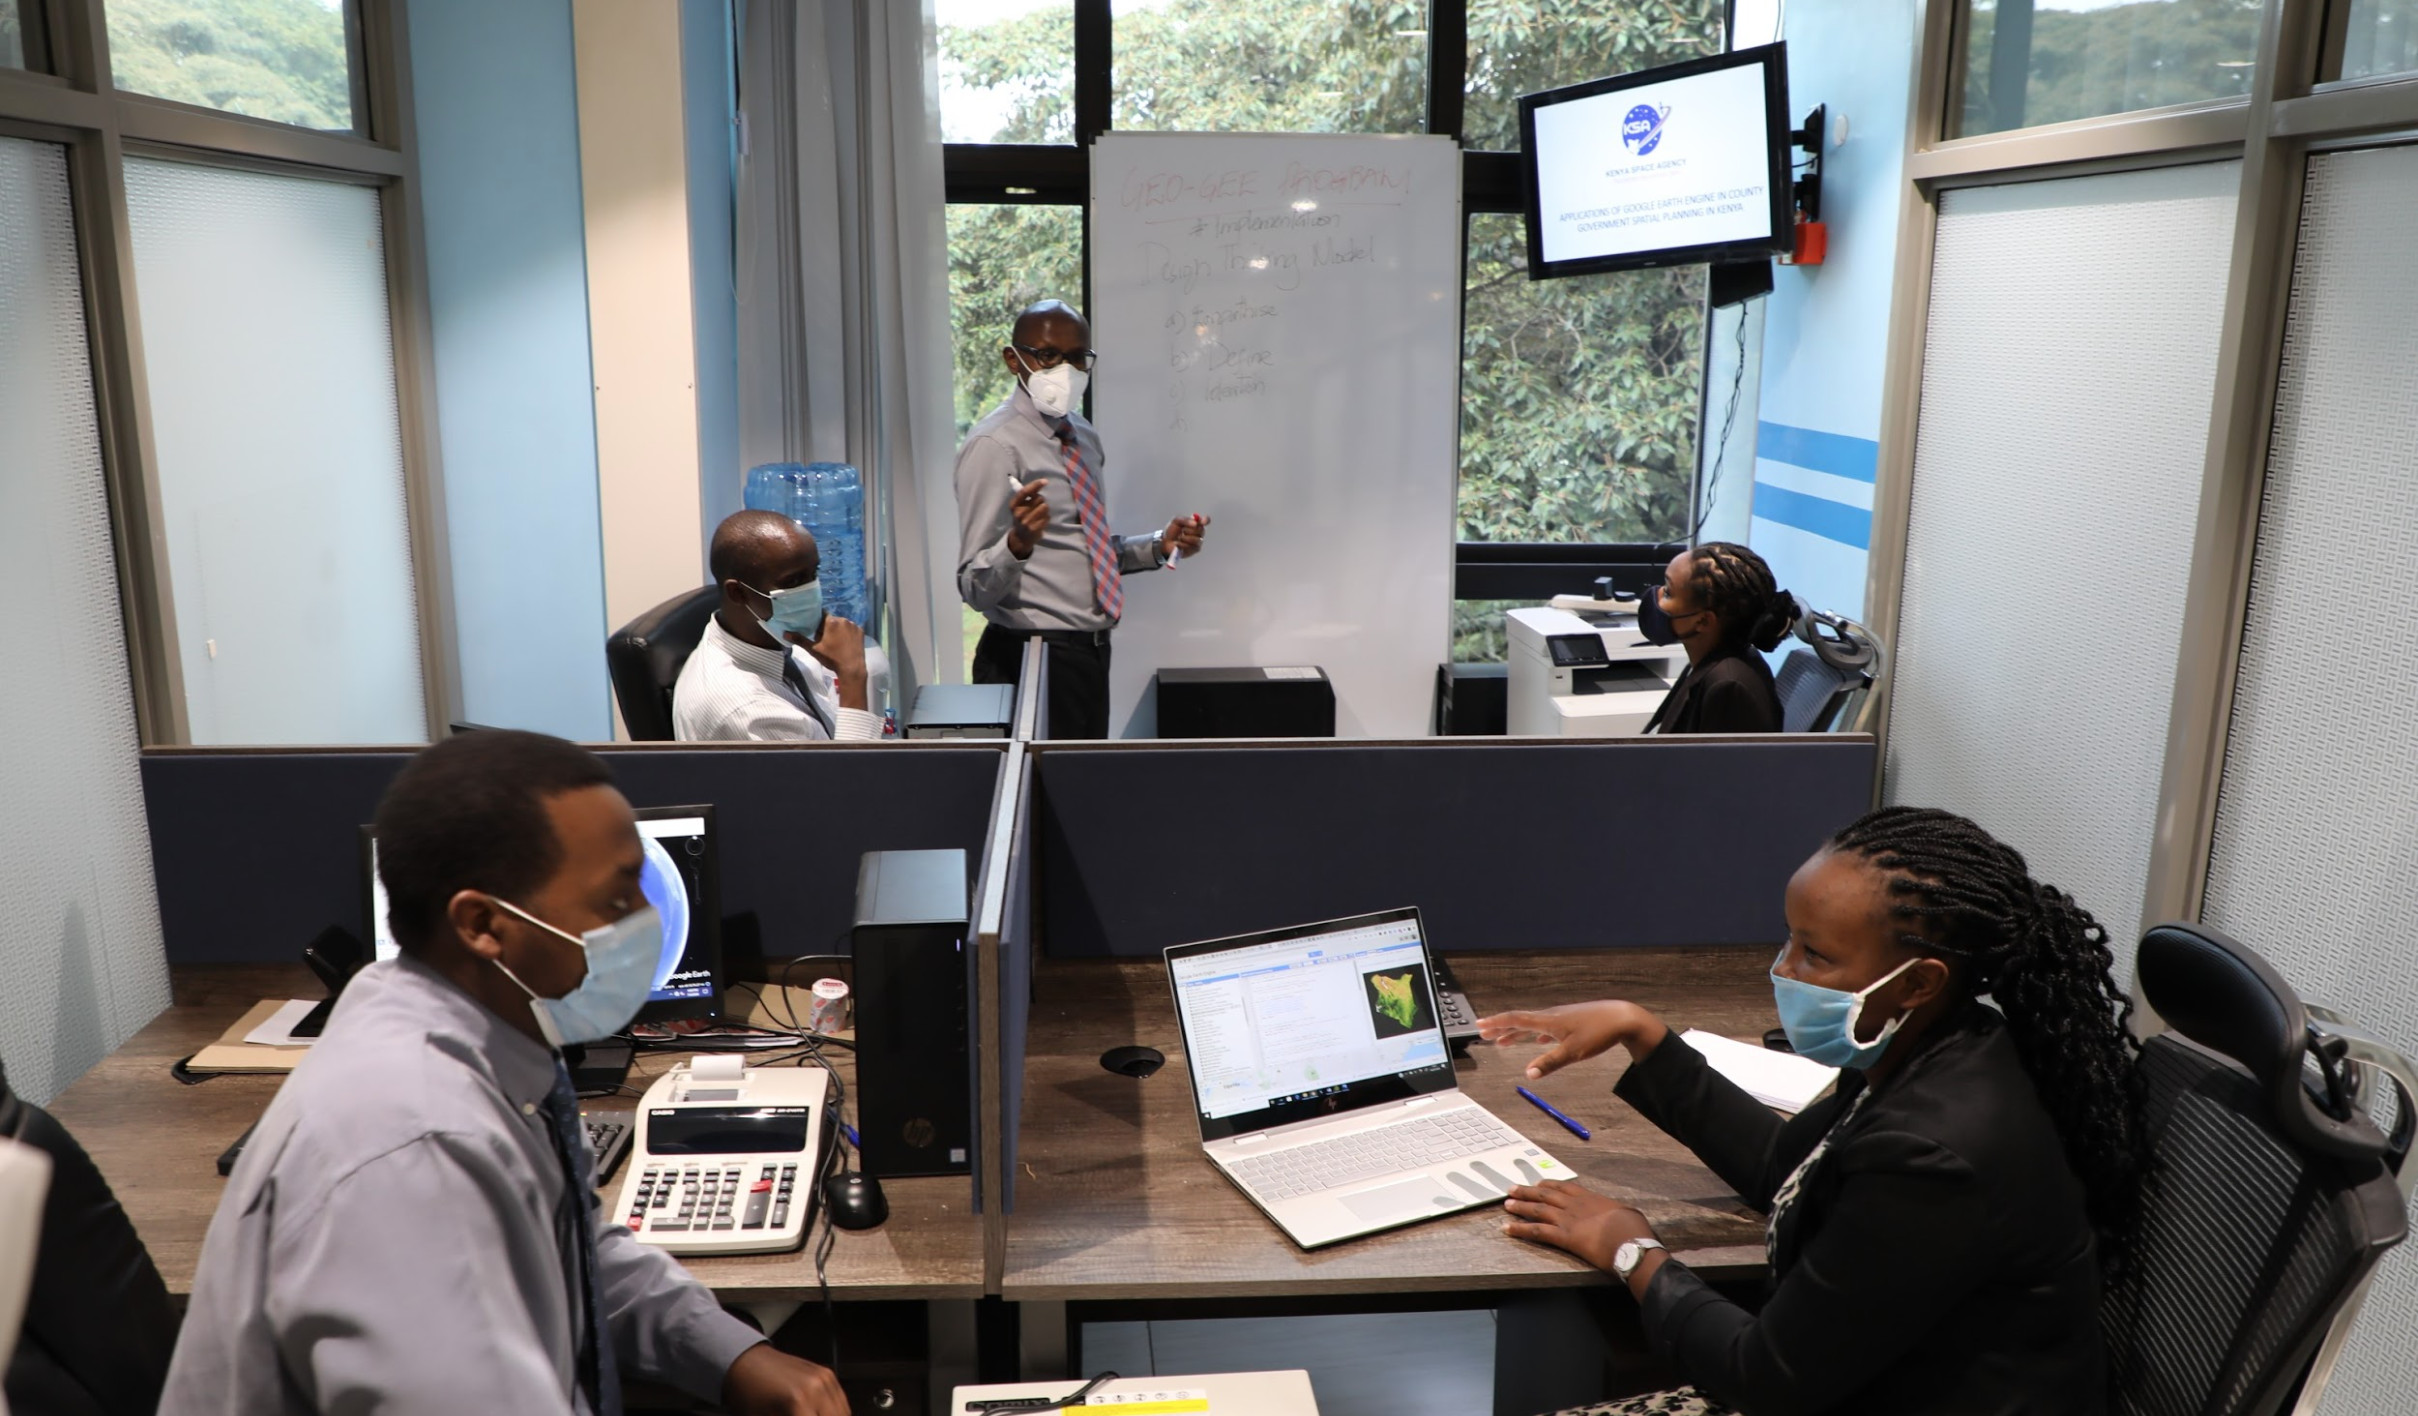 Kenya Space Agency Project team led by Mr. Charles Mwangi (standing) planning the implementation of the GEO-GEE unlimited license award.